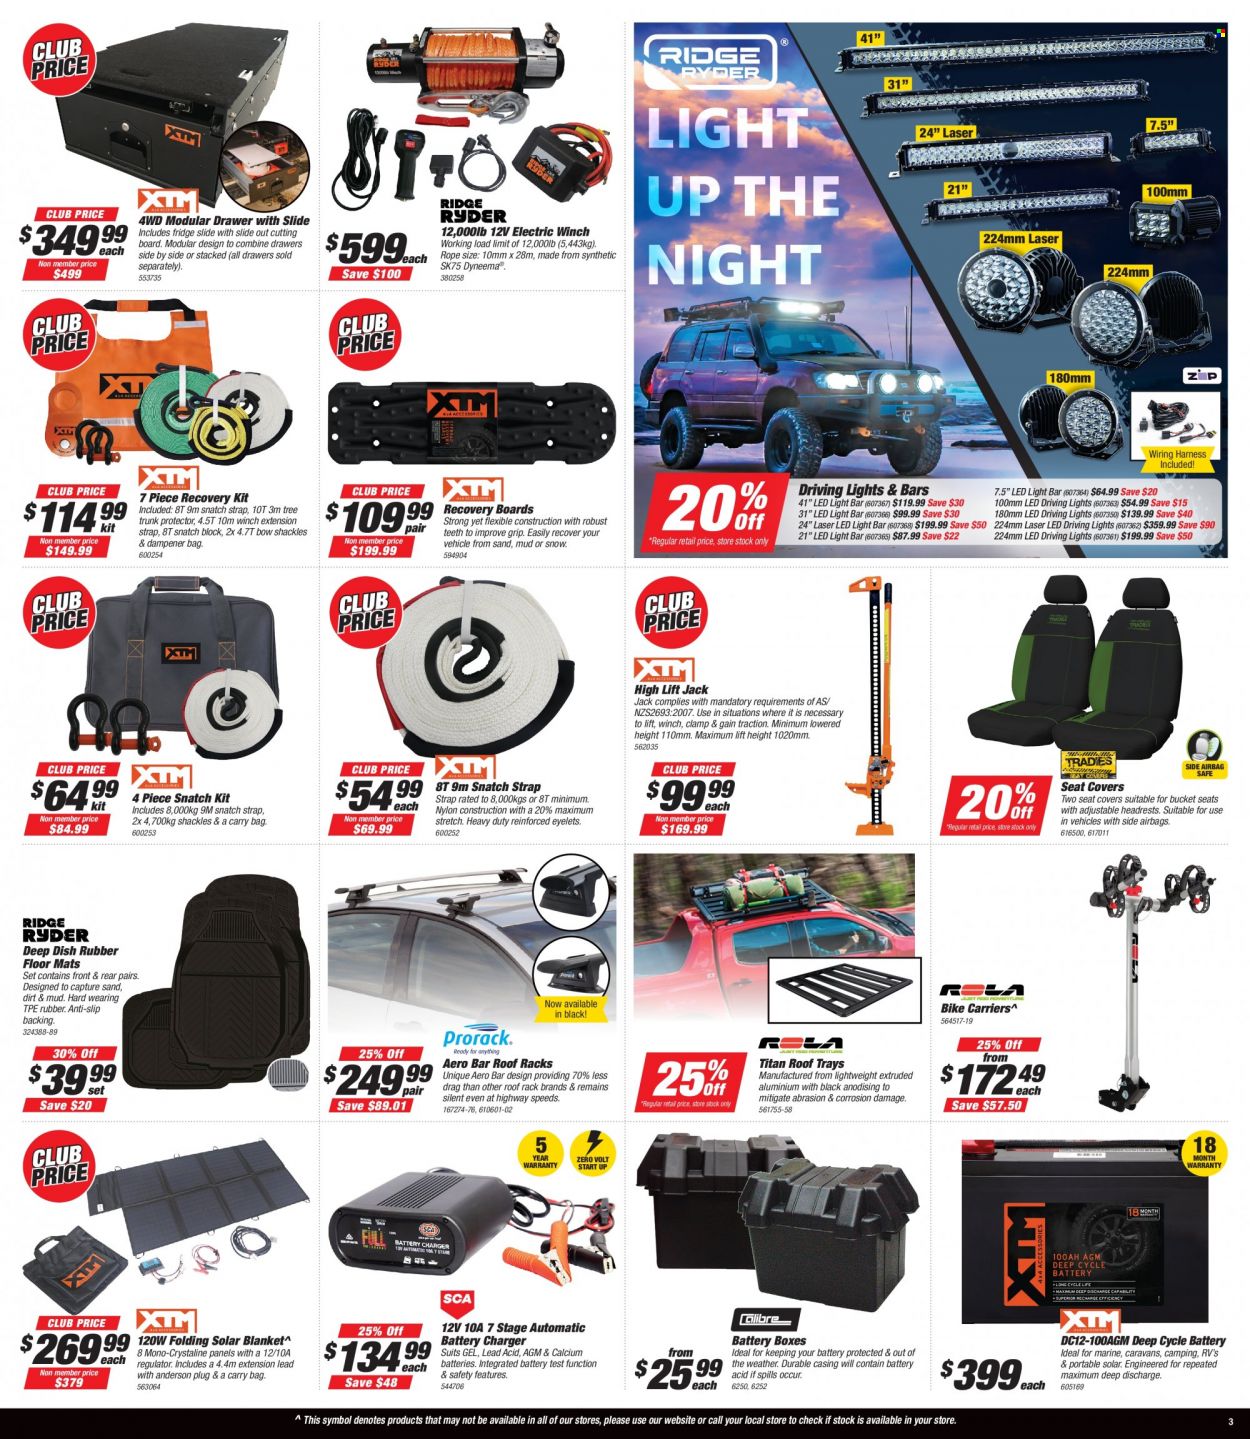 thumbnail - Supercheap Auto Catalogue - 4 Nov 2021 - 14 Nov 2021 - Sales products - Gain, carry bag, solar blanket, blanket, extension lead, strap, car seat cover, car floor mats, high lift jack, recovery boards, roof rack, battery charger, deep cycle battery, driving lights, wiring harness, fridge slide. Page 3.